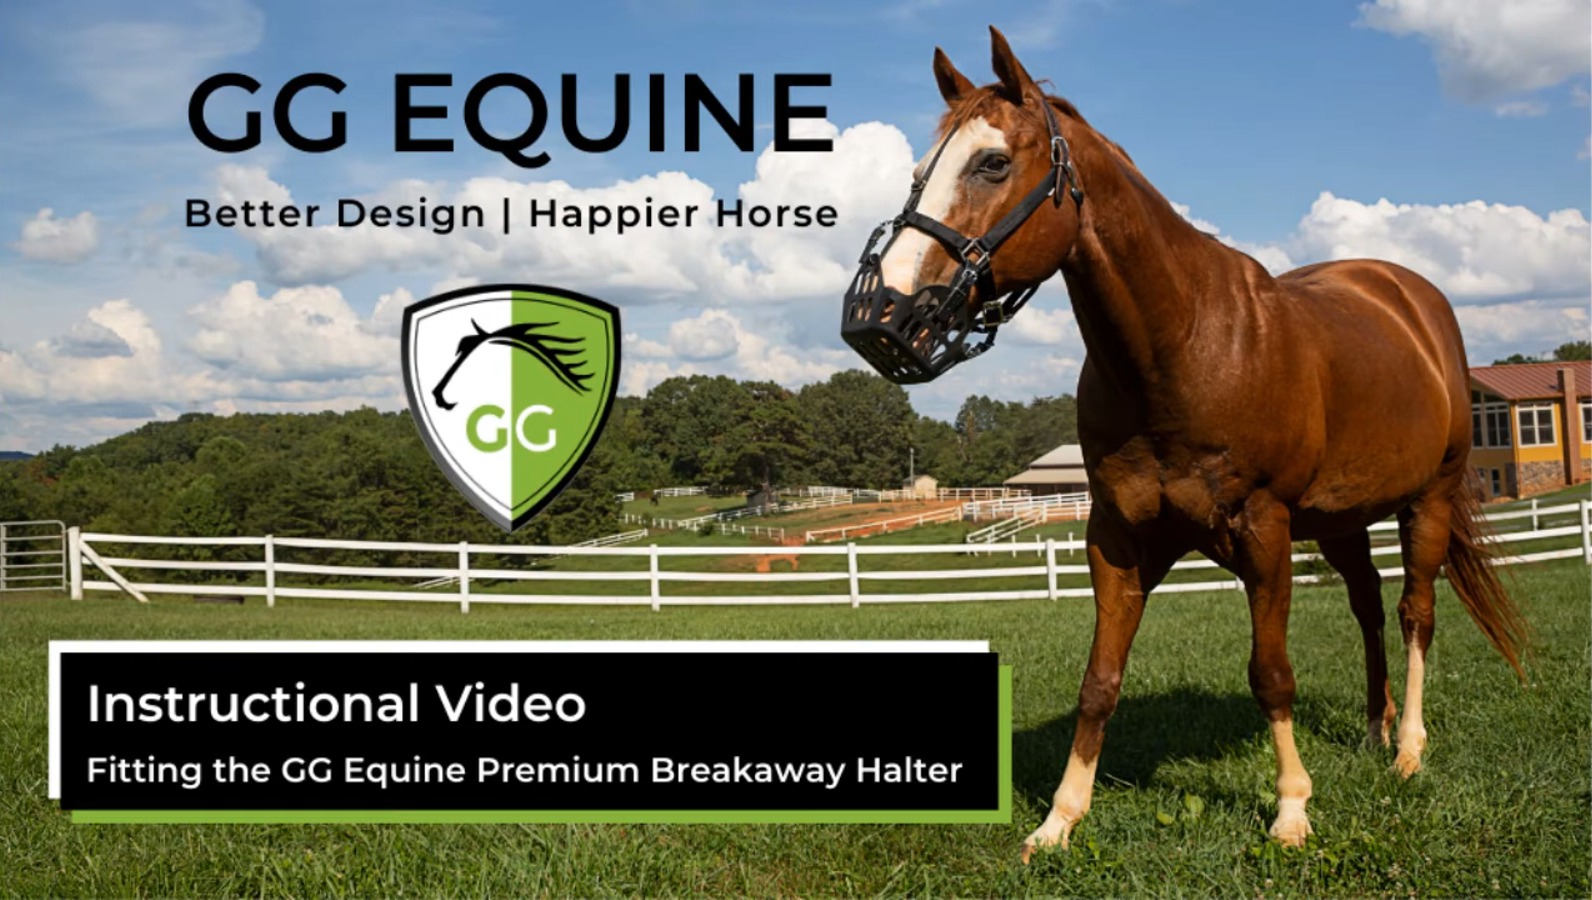 Load video: How to fit the GG Equine Premium Breakaway Safety Halter for Horses